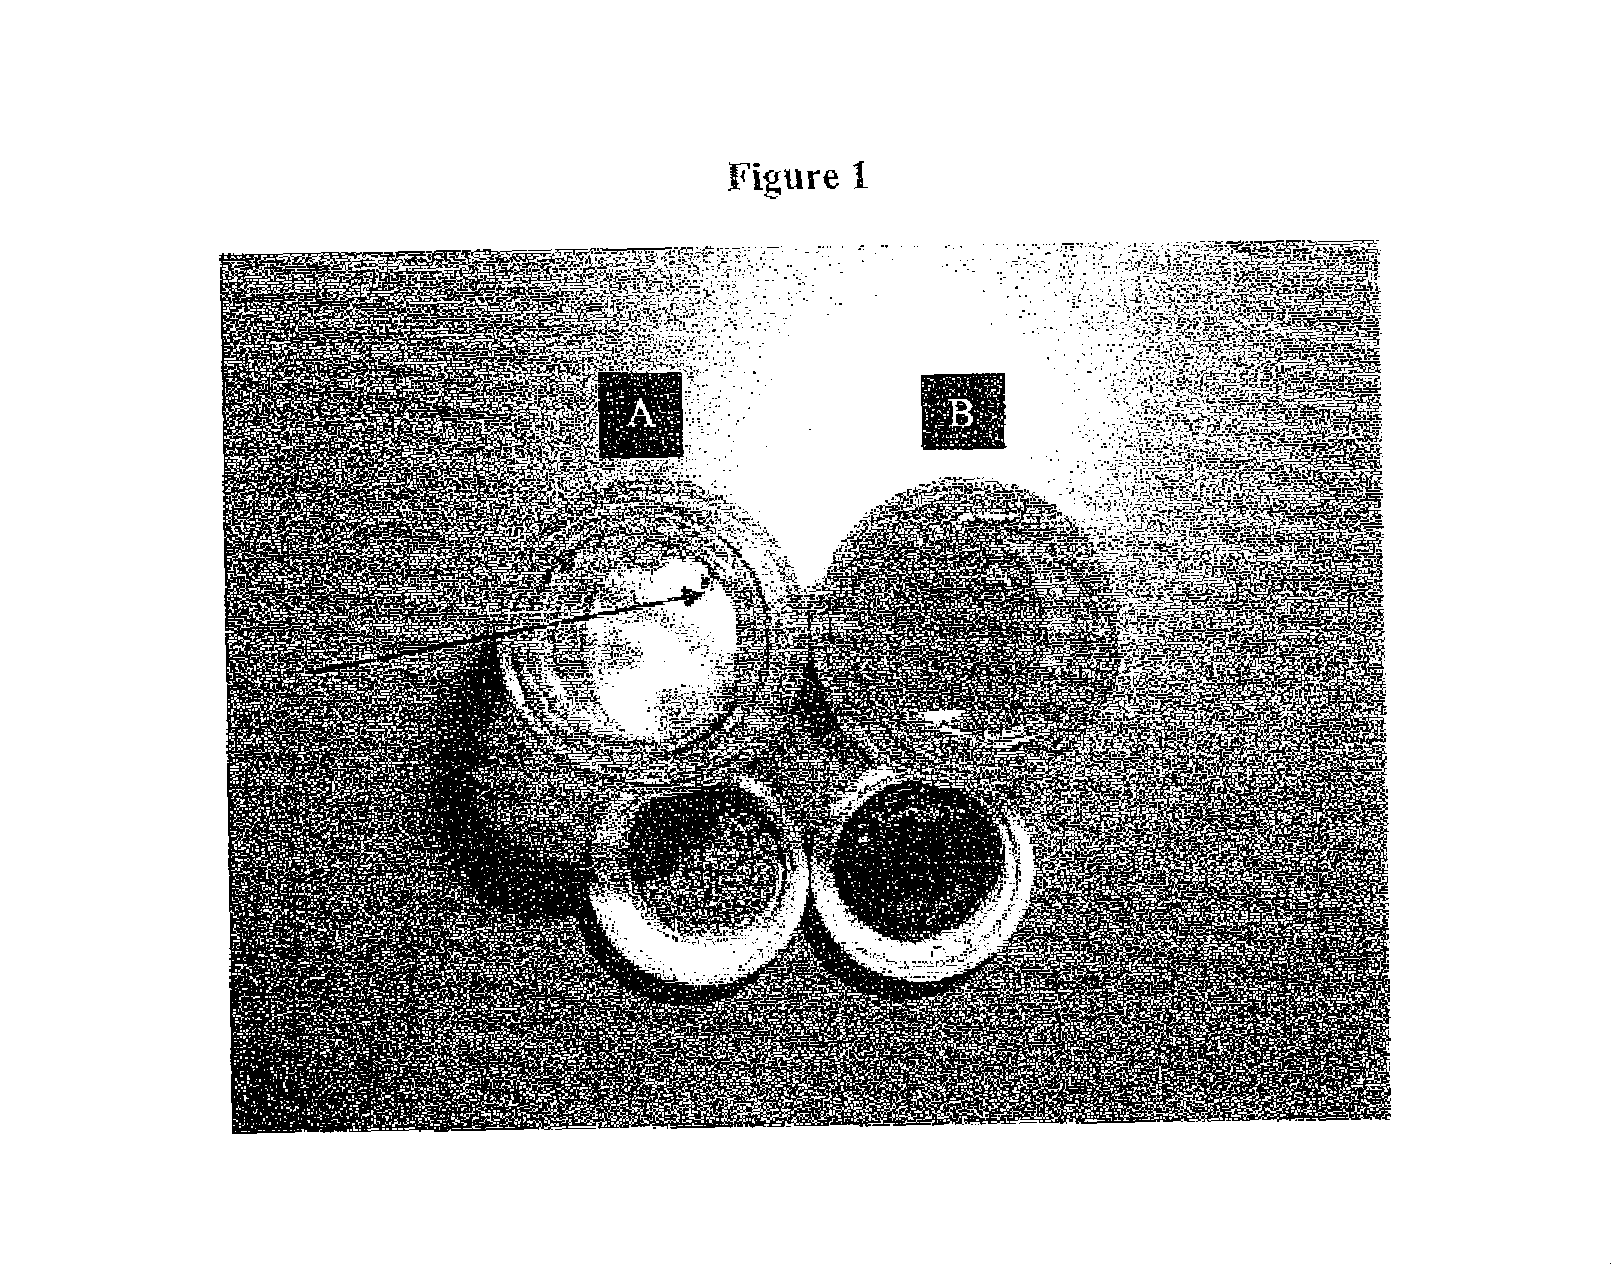 Topical formulations of tellurium-containing compounds